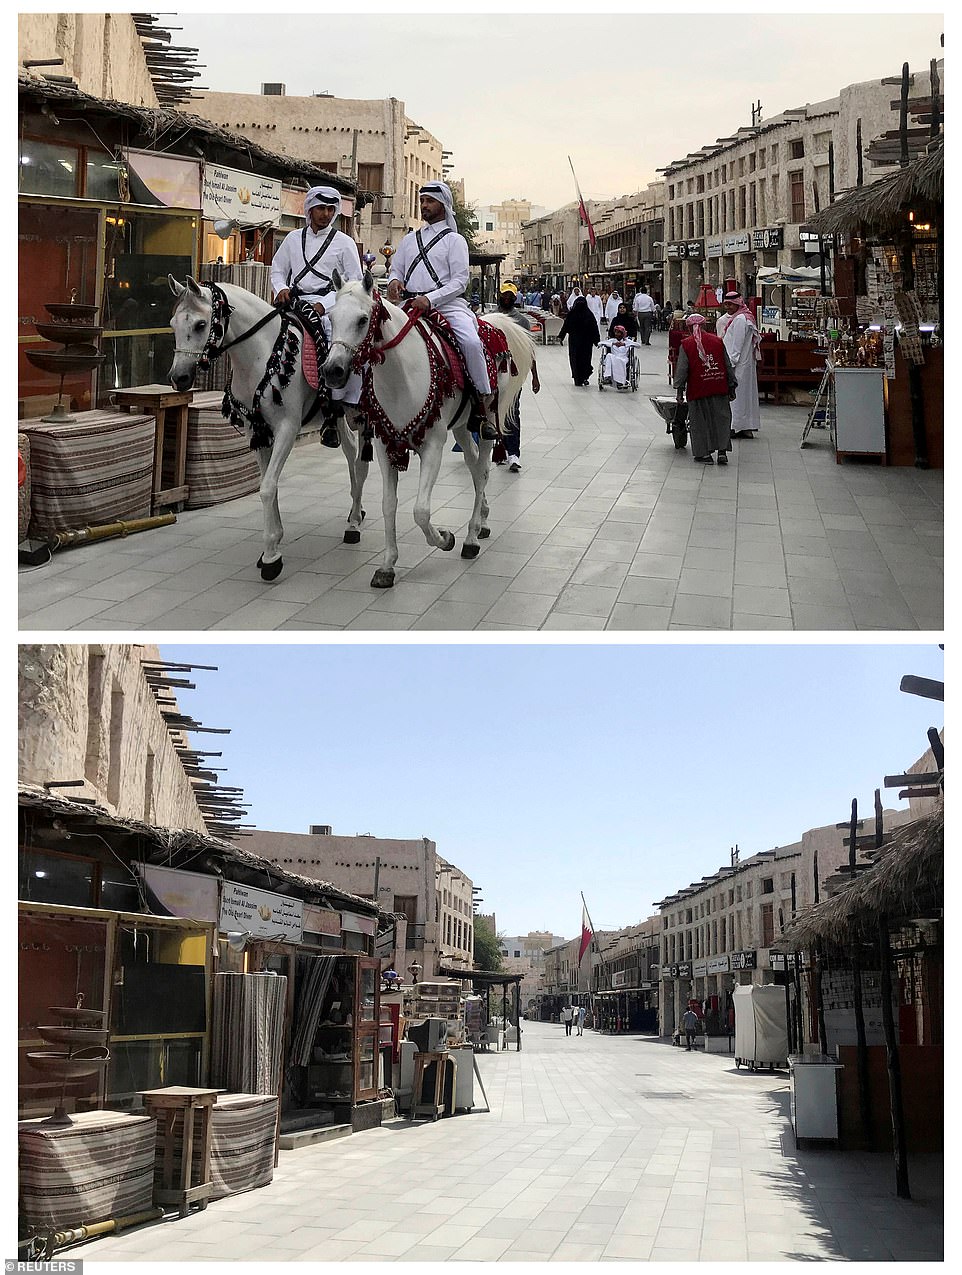 Souq Waqif, Qatar before and after